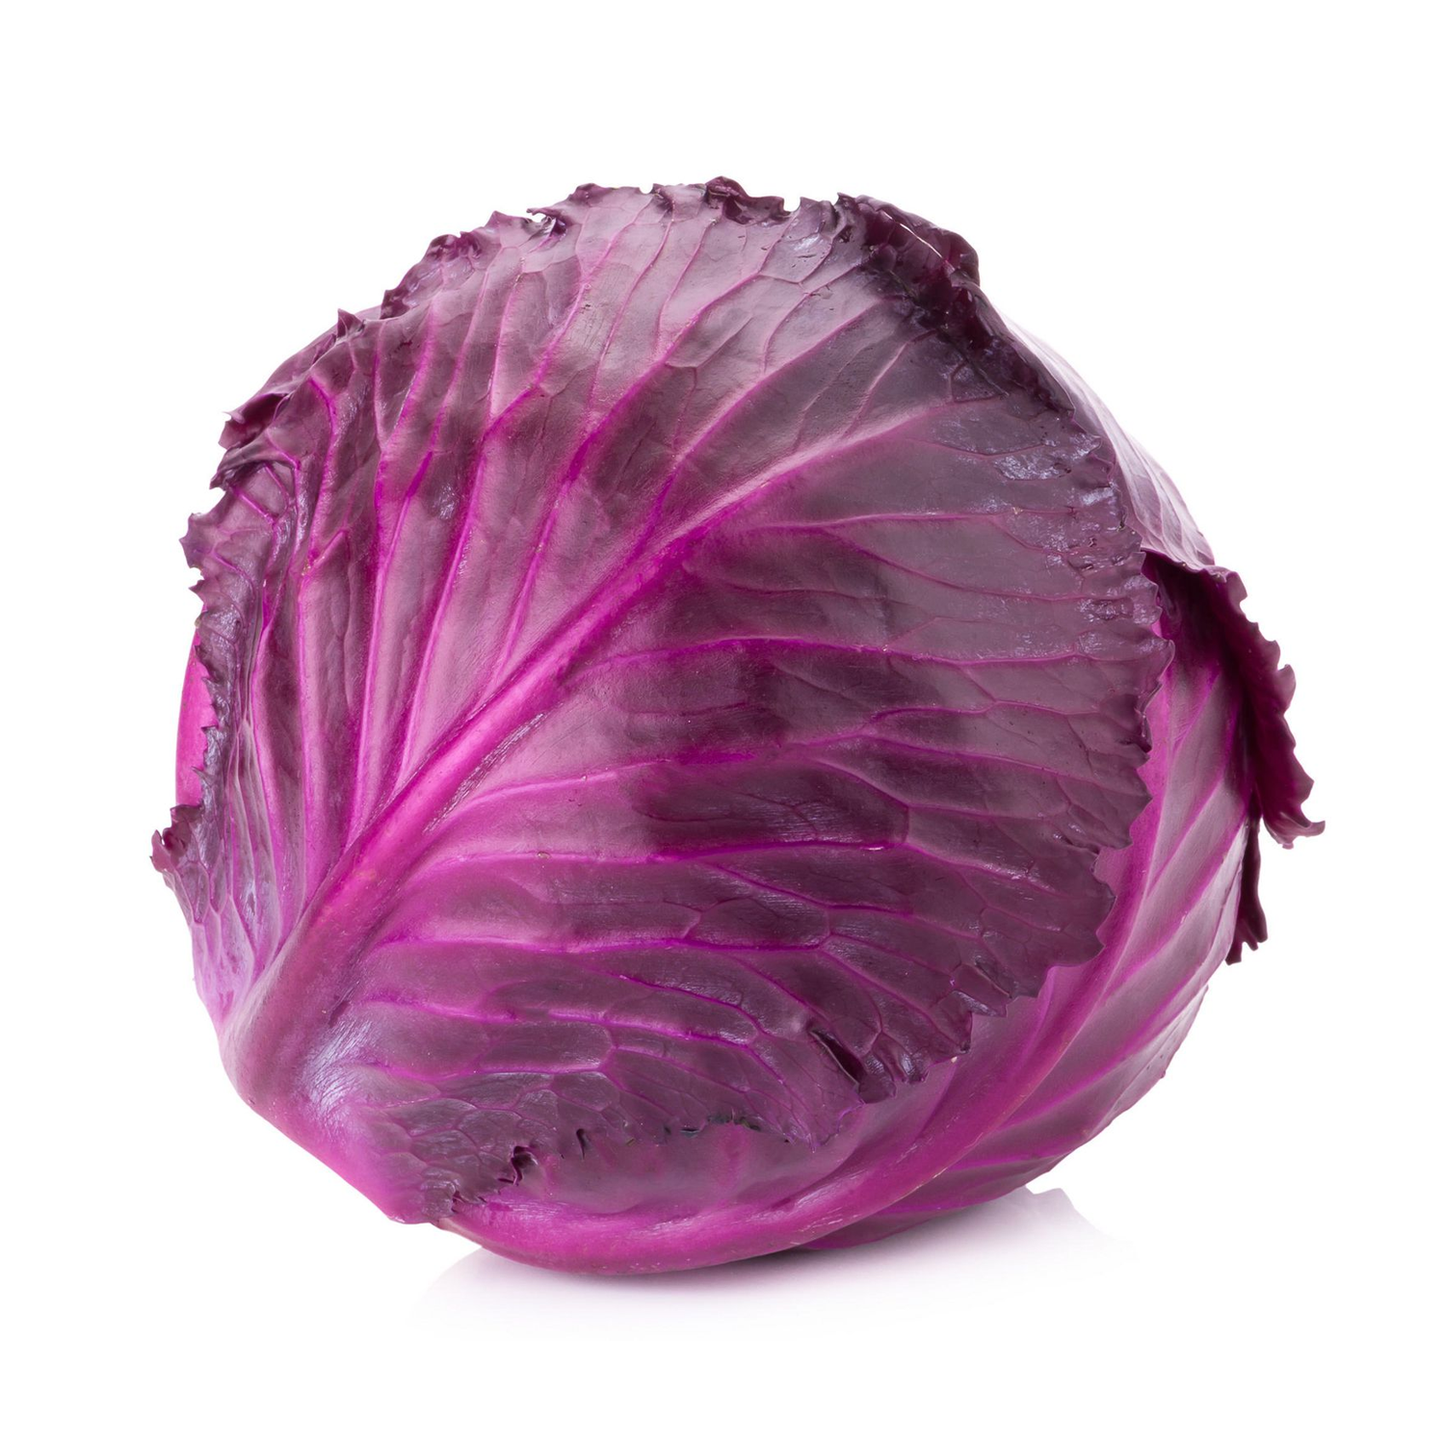 Red Cabbage / 1 pc